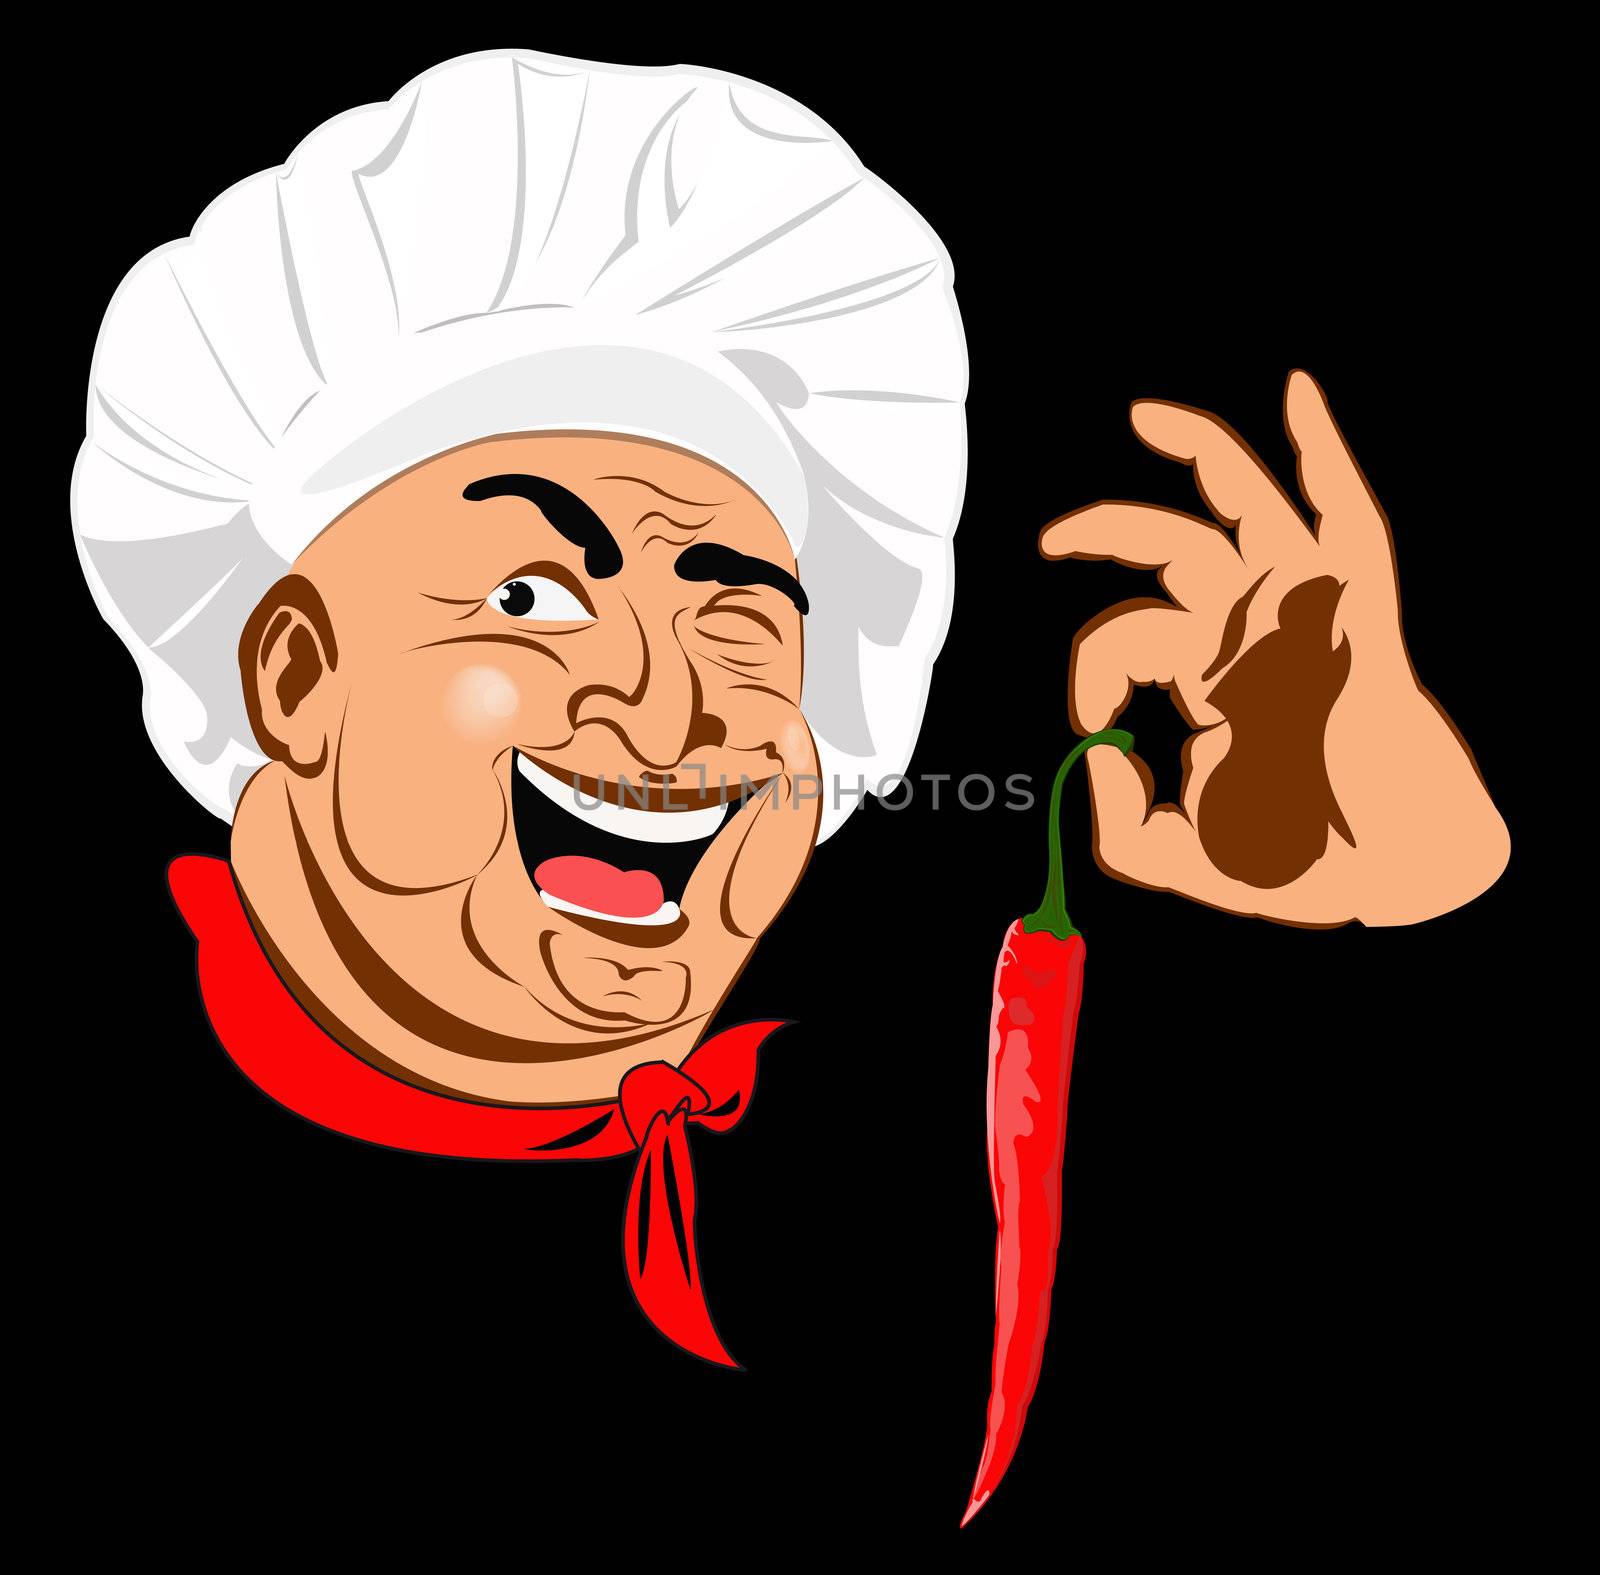 Funny Chef and Spicy burning red pepper chilli by sergey150770SV